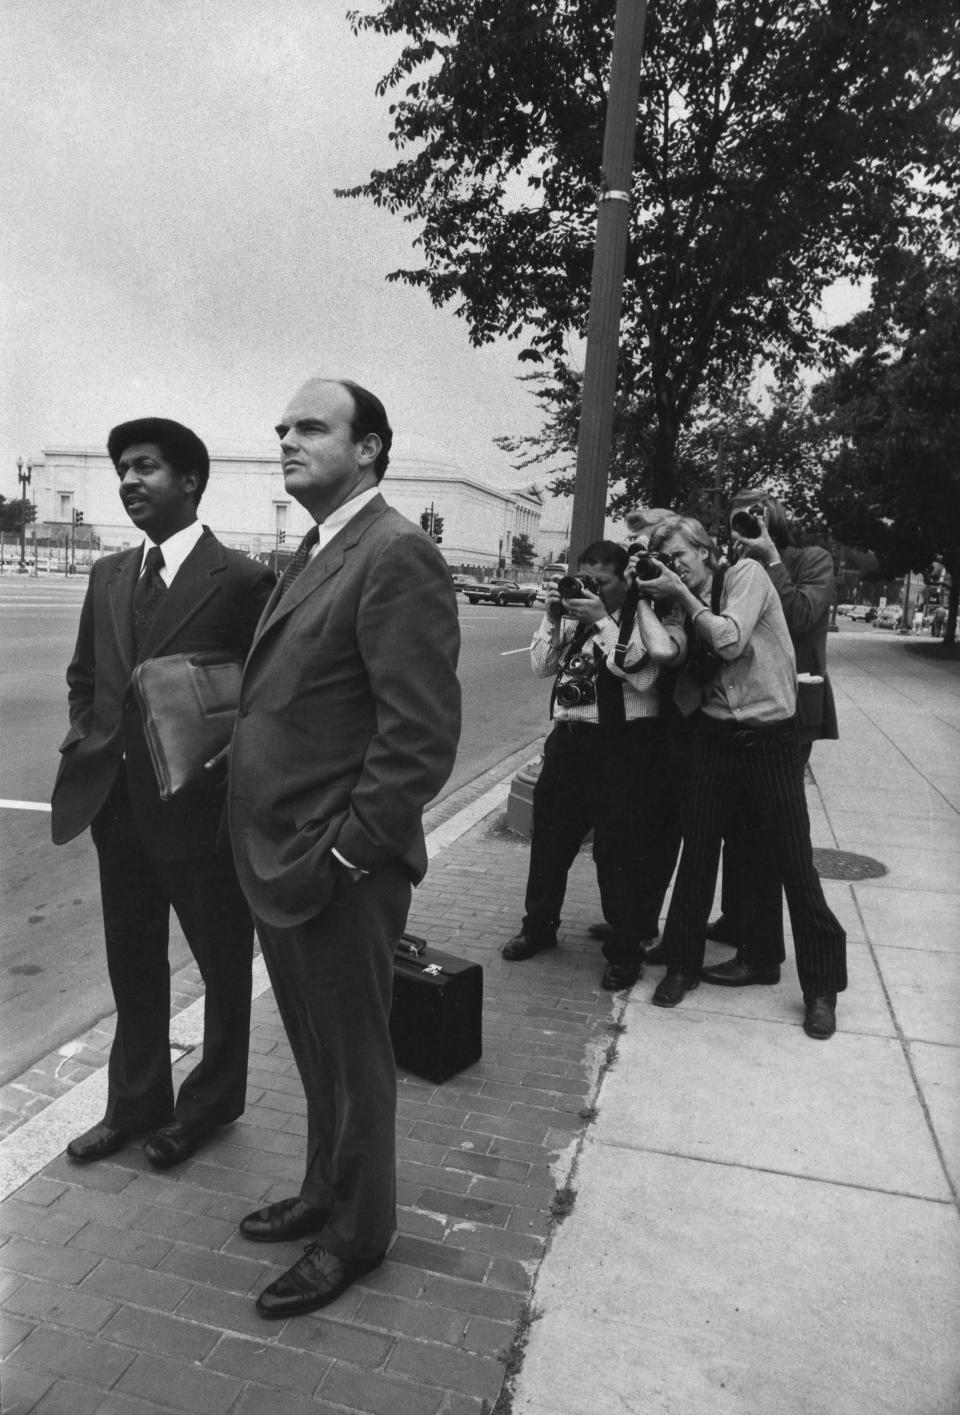 WASHINGTON - NOVEMBER:  (NO U.S. TABLOID SALES)  Former Senior Advisor to President Richard Nixon, John Ehrilchman waits for a cab in front of the Federal courthouse after testifying in the Watergate scandal on November 1973 in Washington DC. Ehrilchman was indited for Watergate Crimes.  (Photo by David Hume Kennerly/Getty images)